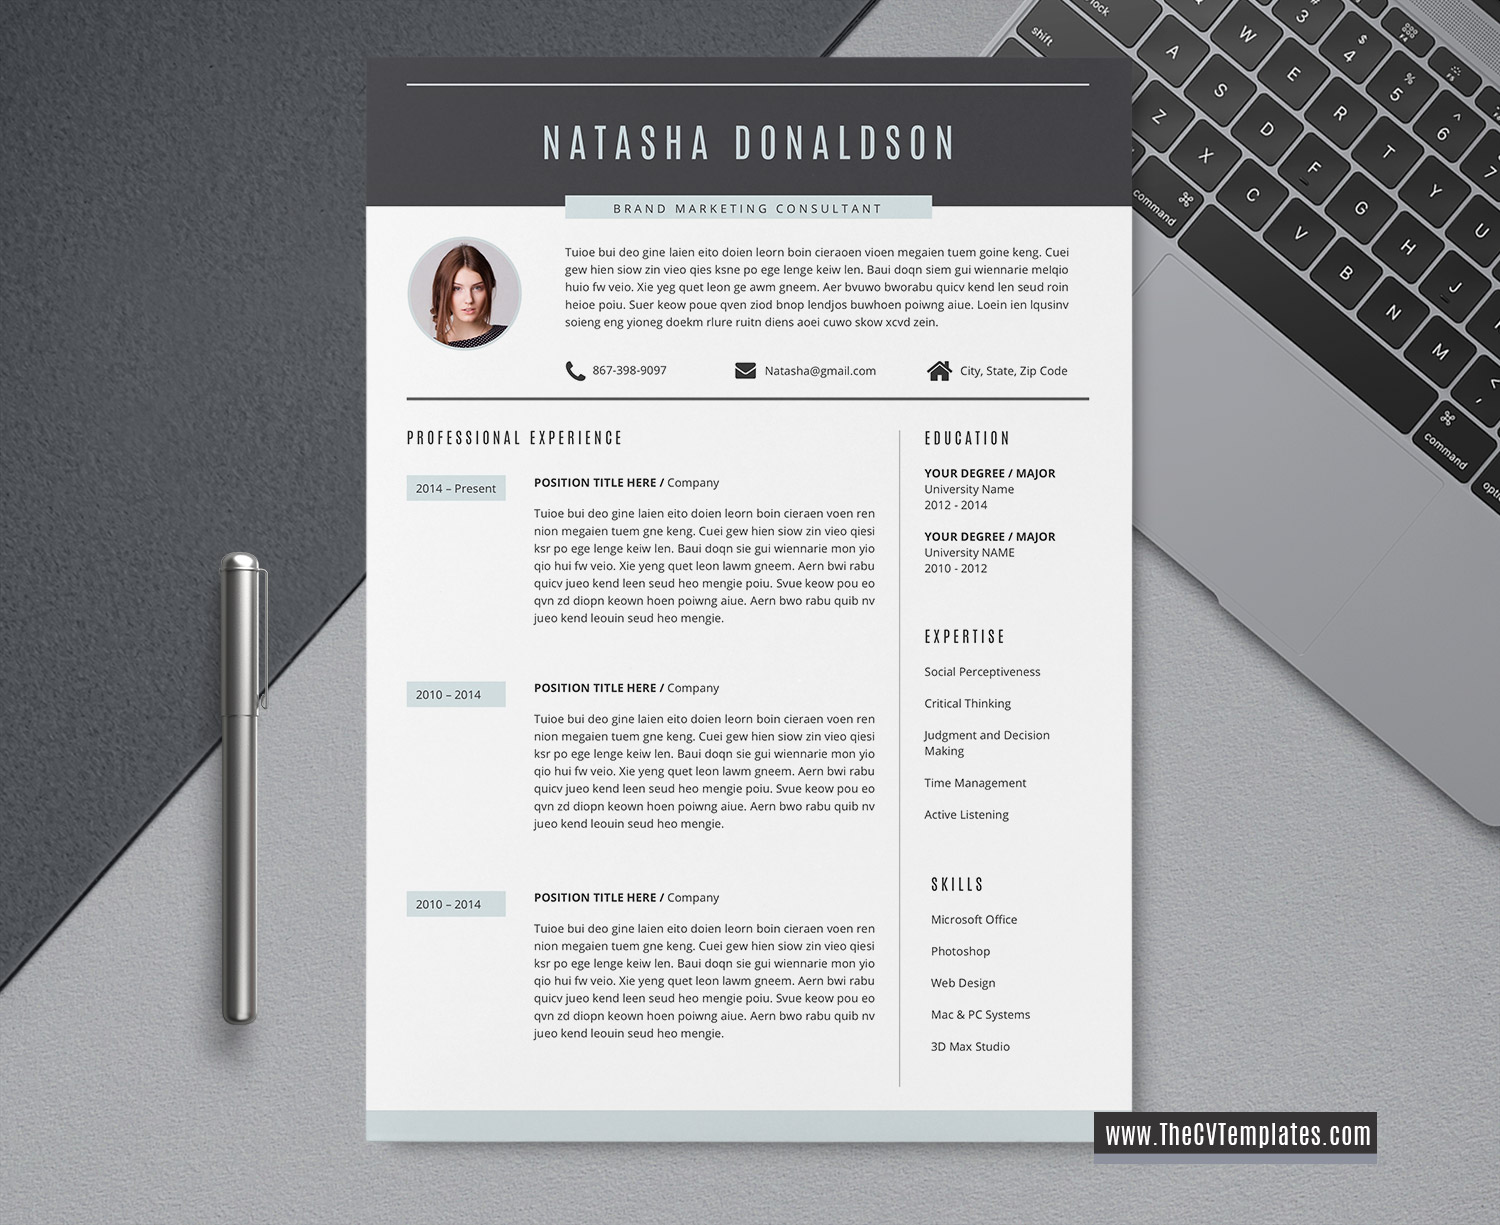 Ms Office Resume Templates from www.thecvtemplates.com